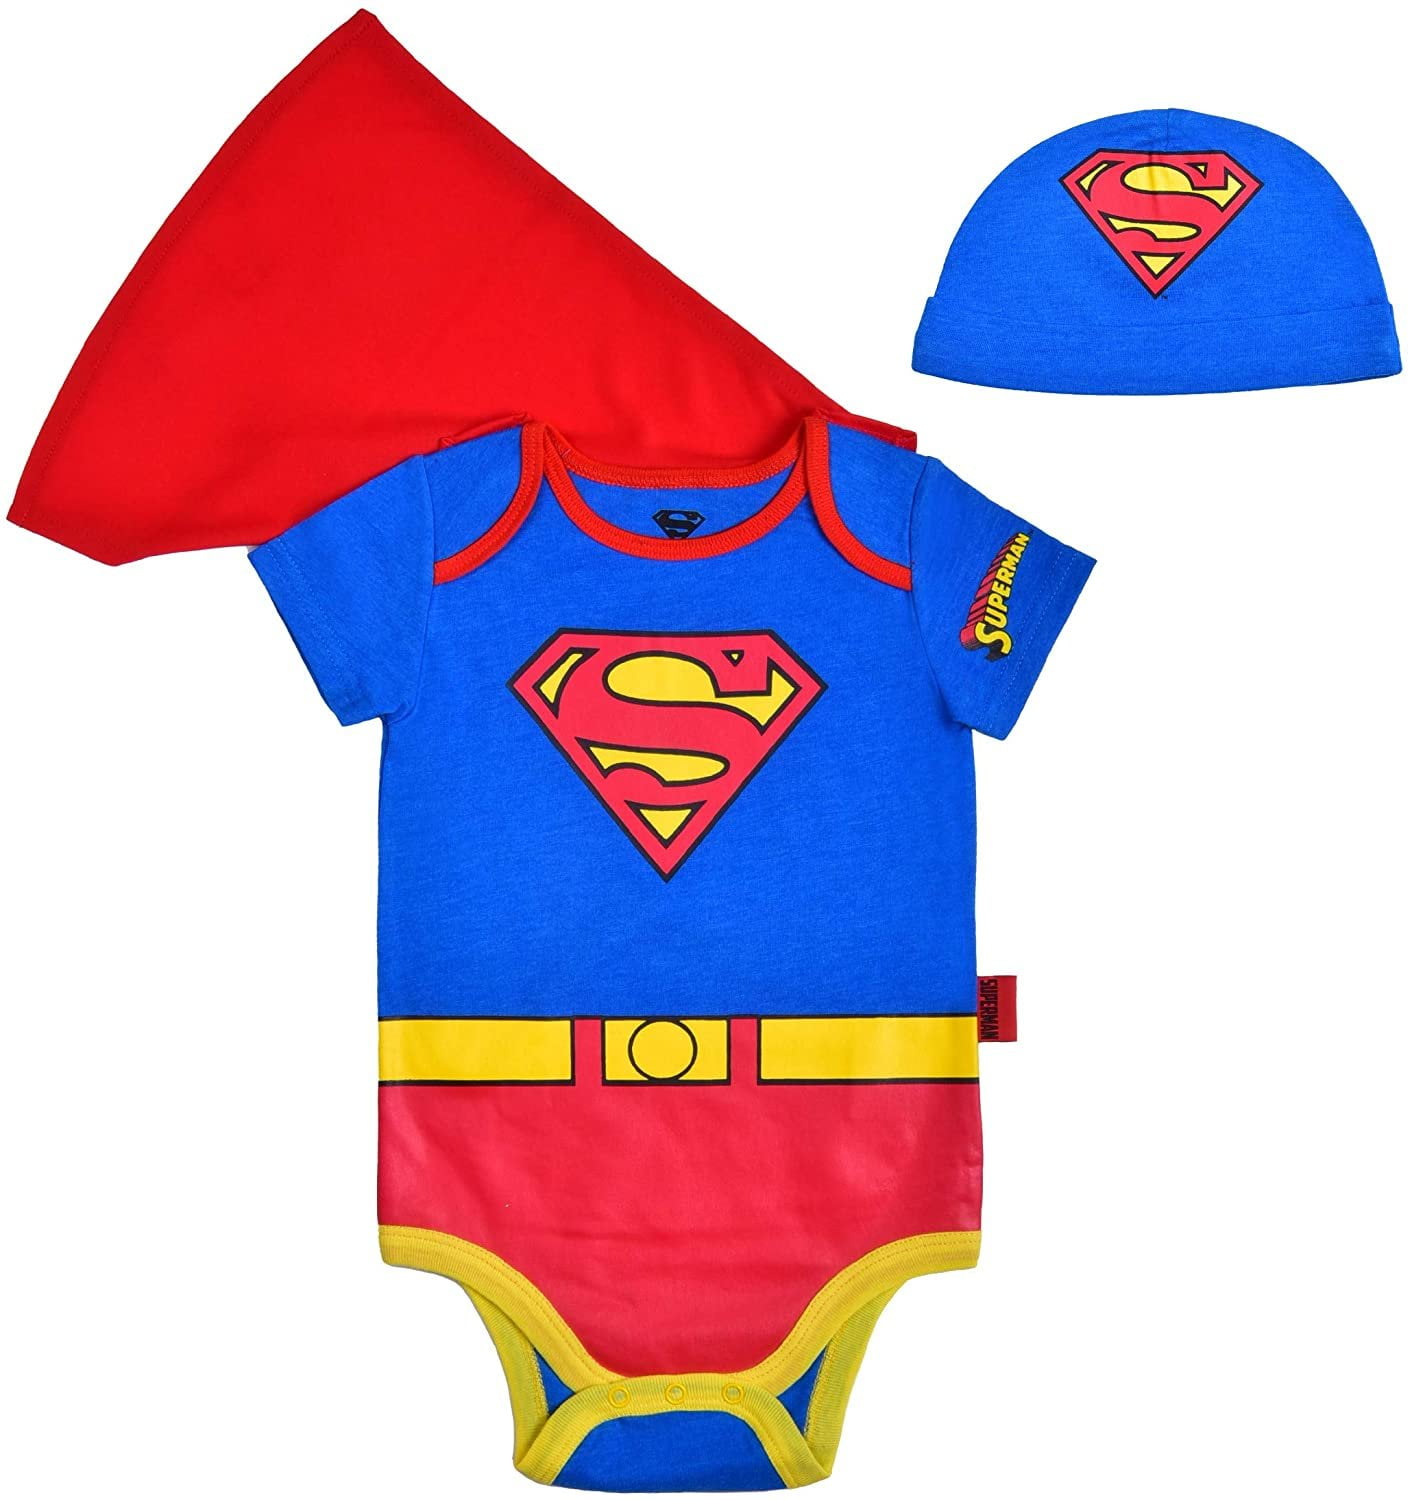 0-3 Months Kids with Character One Piece Superman Stripes 